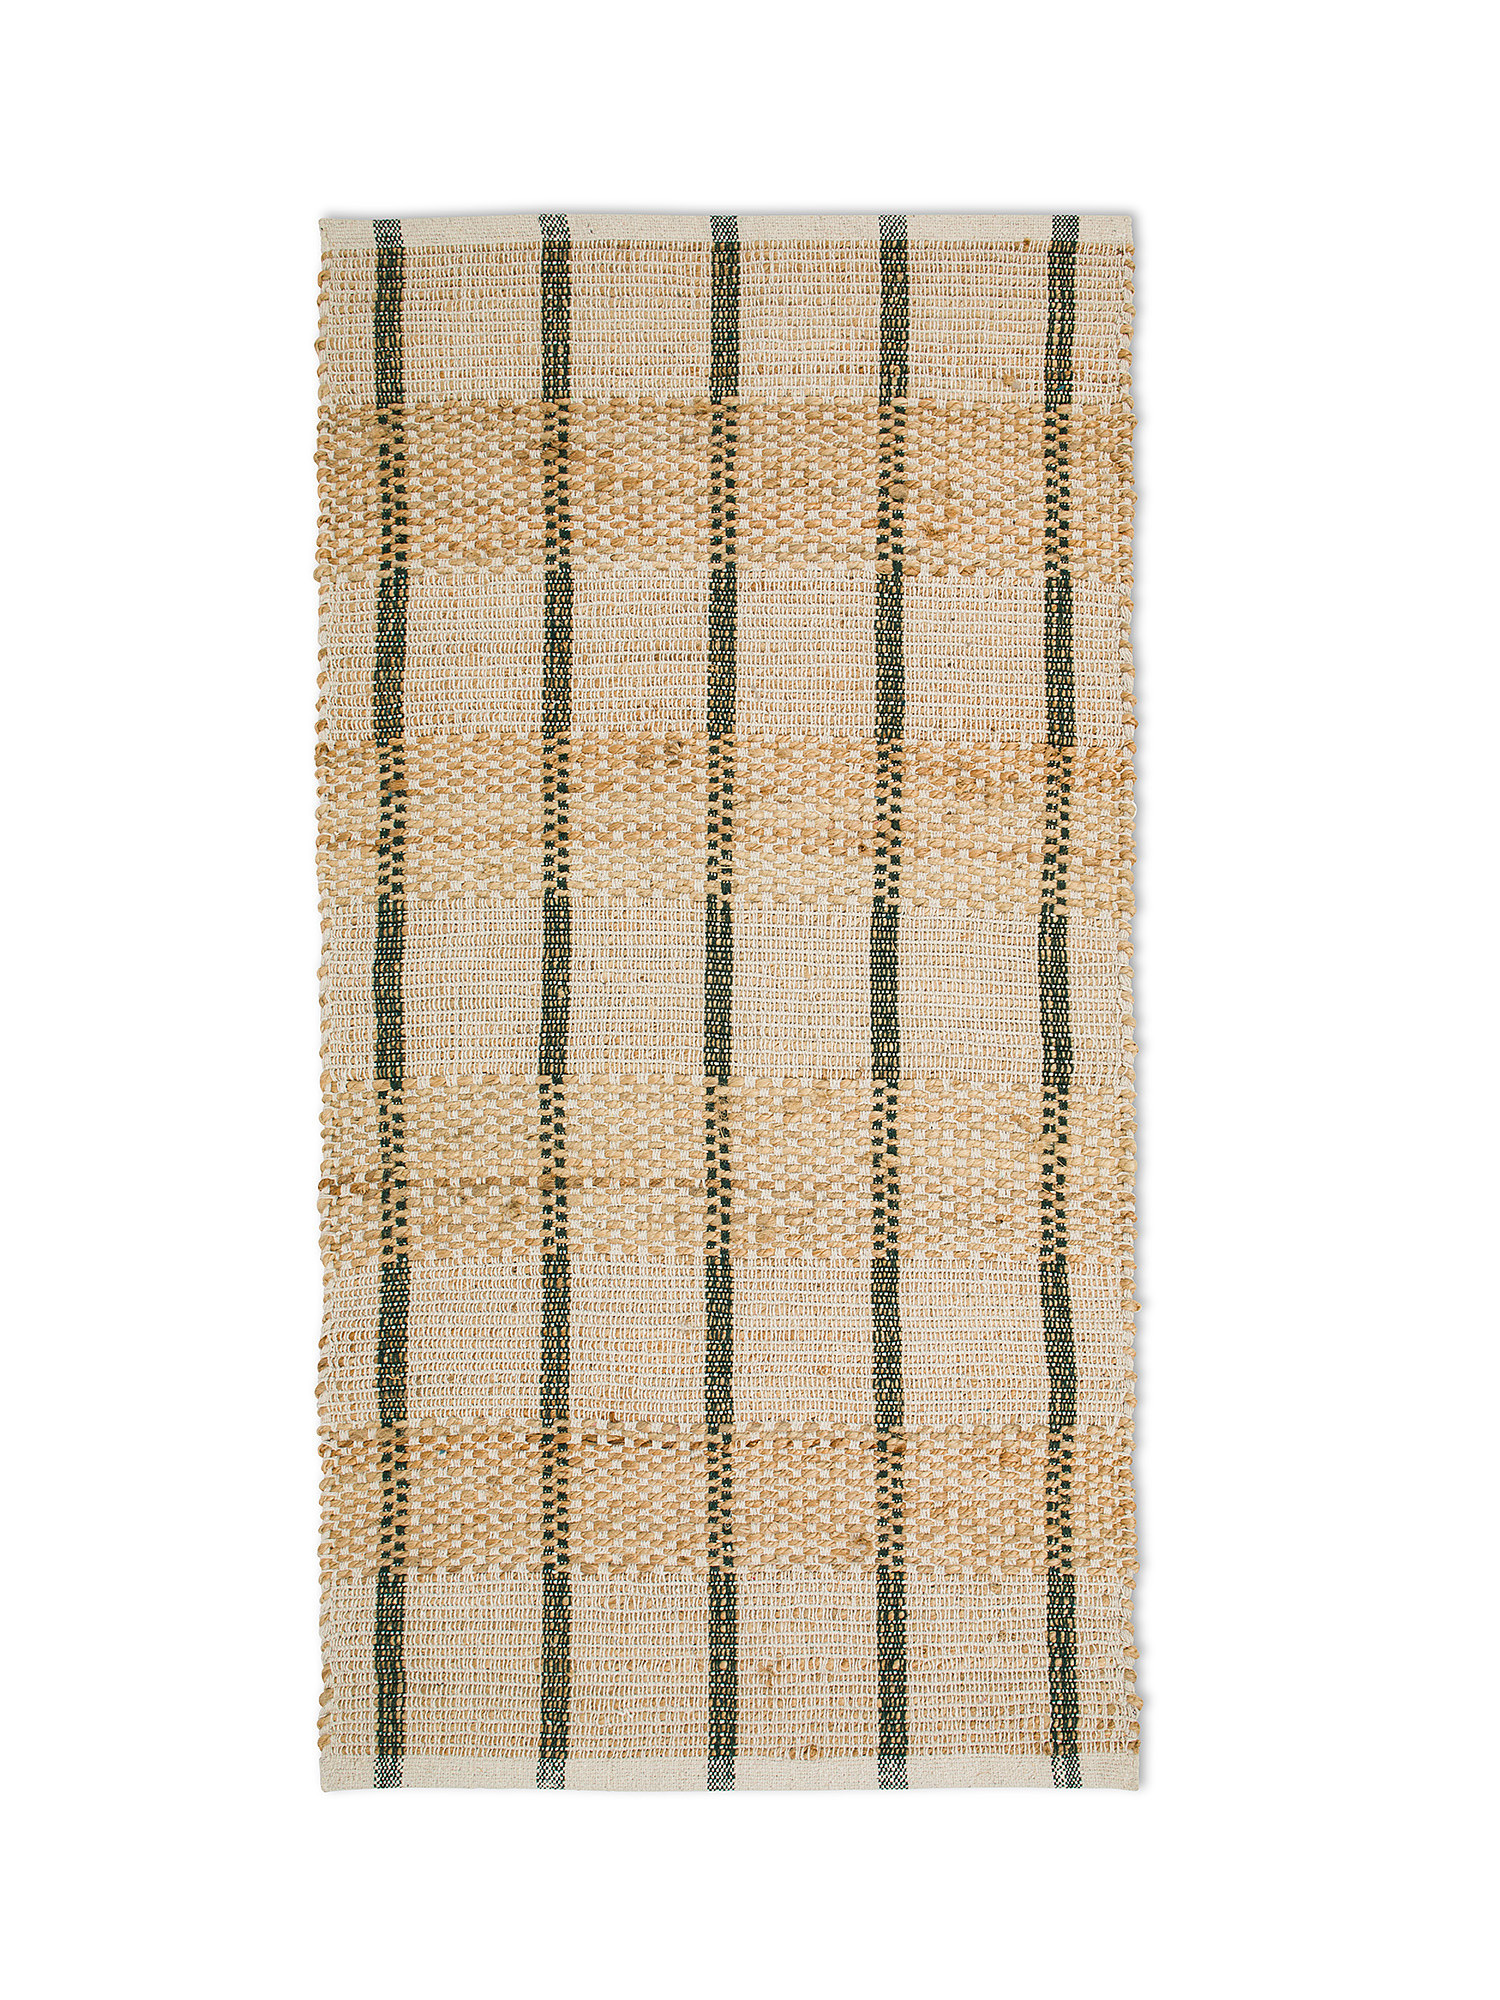 Jute and cotton kitchen rug with geometric pattern, Multicolor, large image number 0